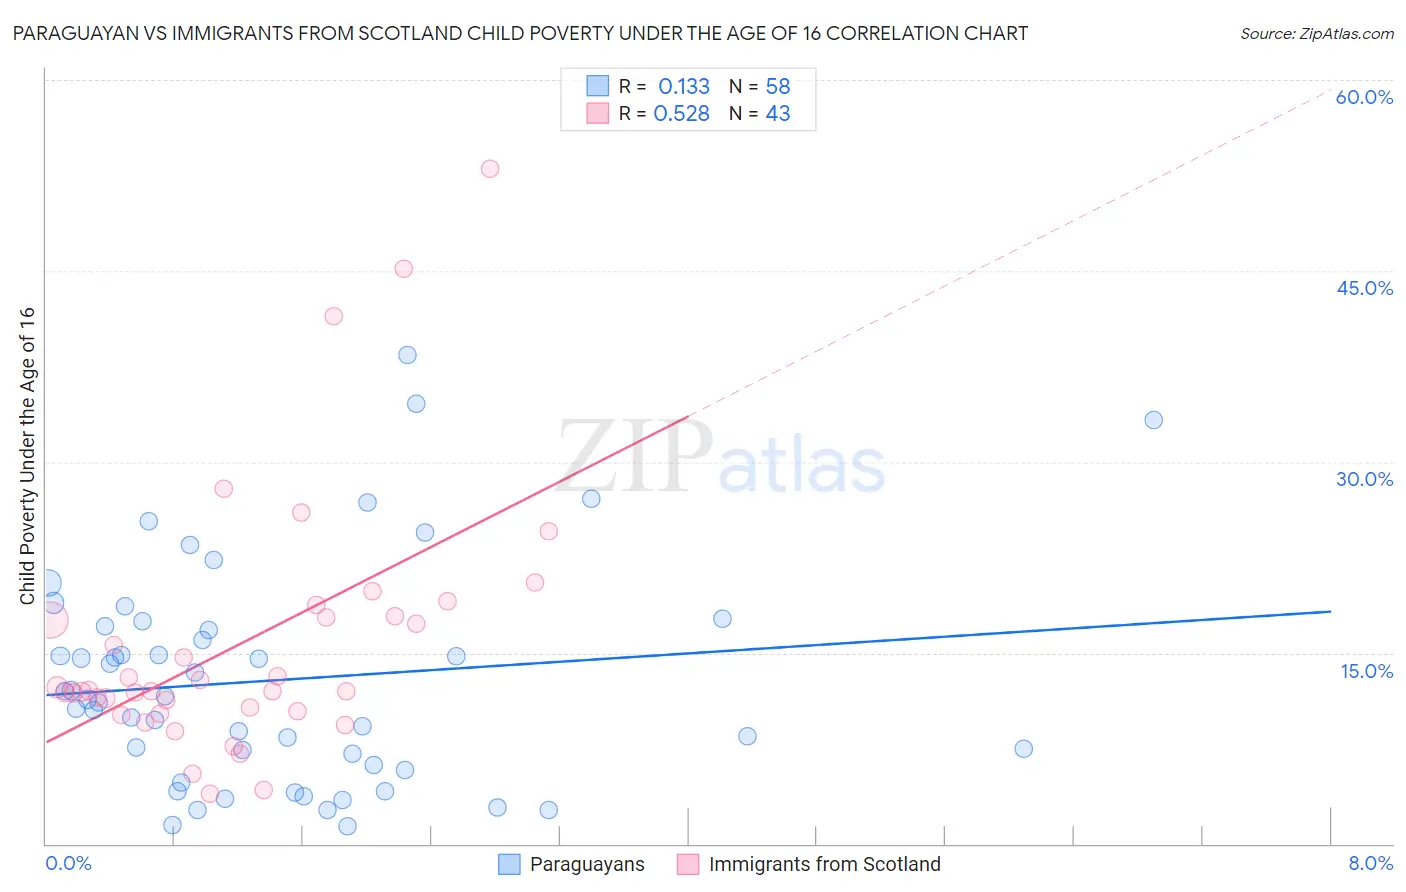 Paraguayan vs Immigrants from Scotland Child Poverty Under the Age of 16